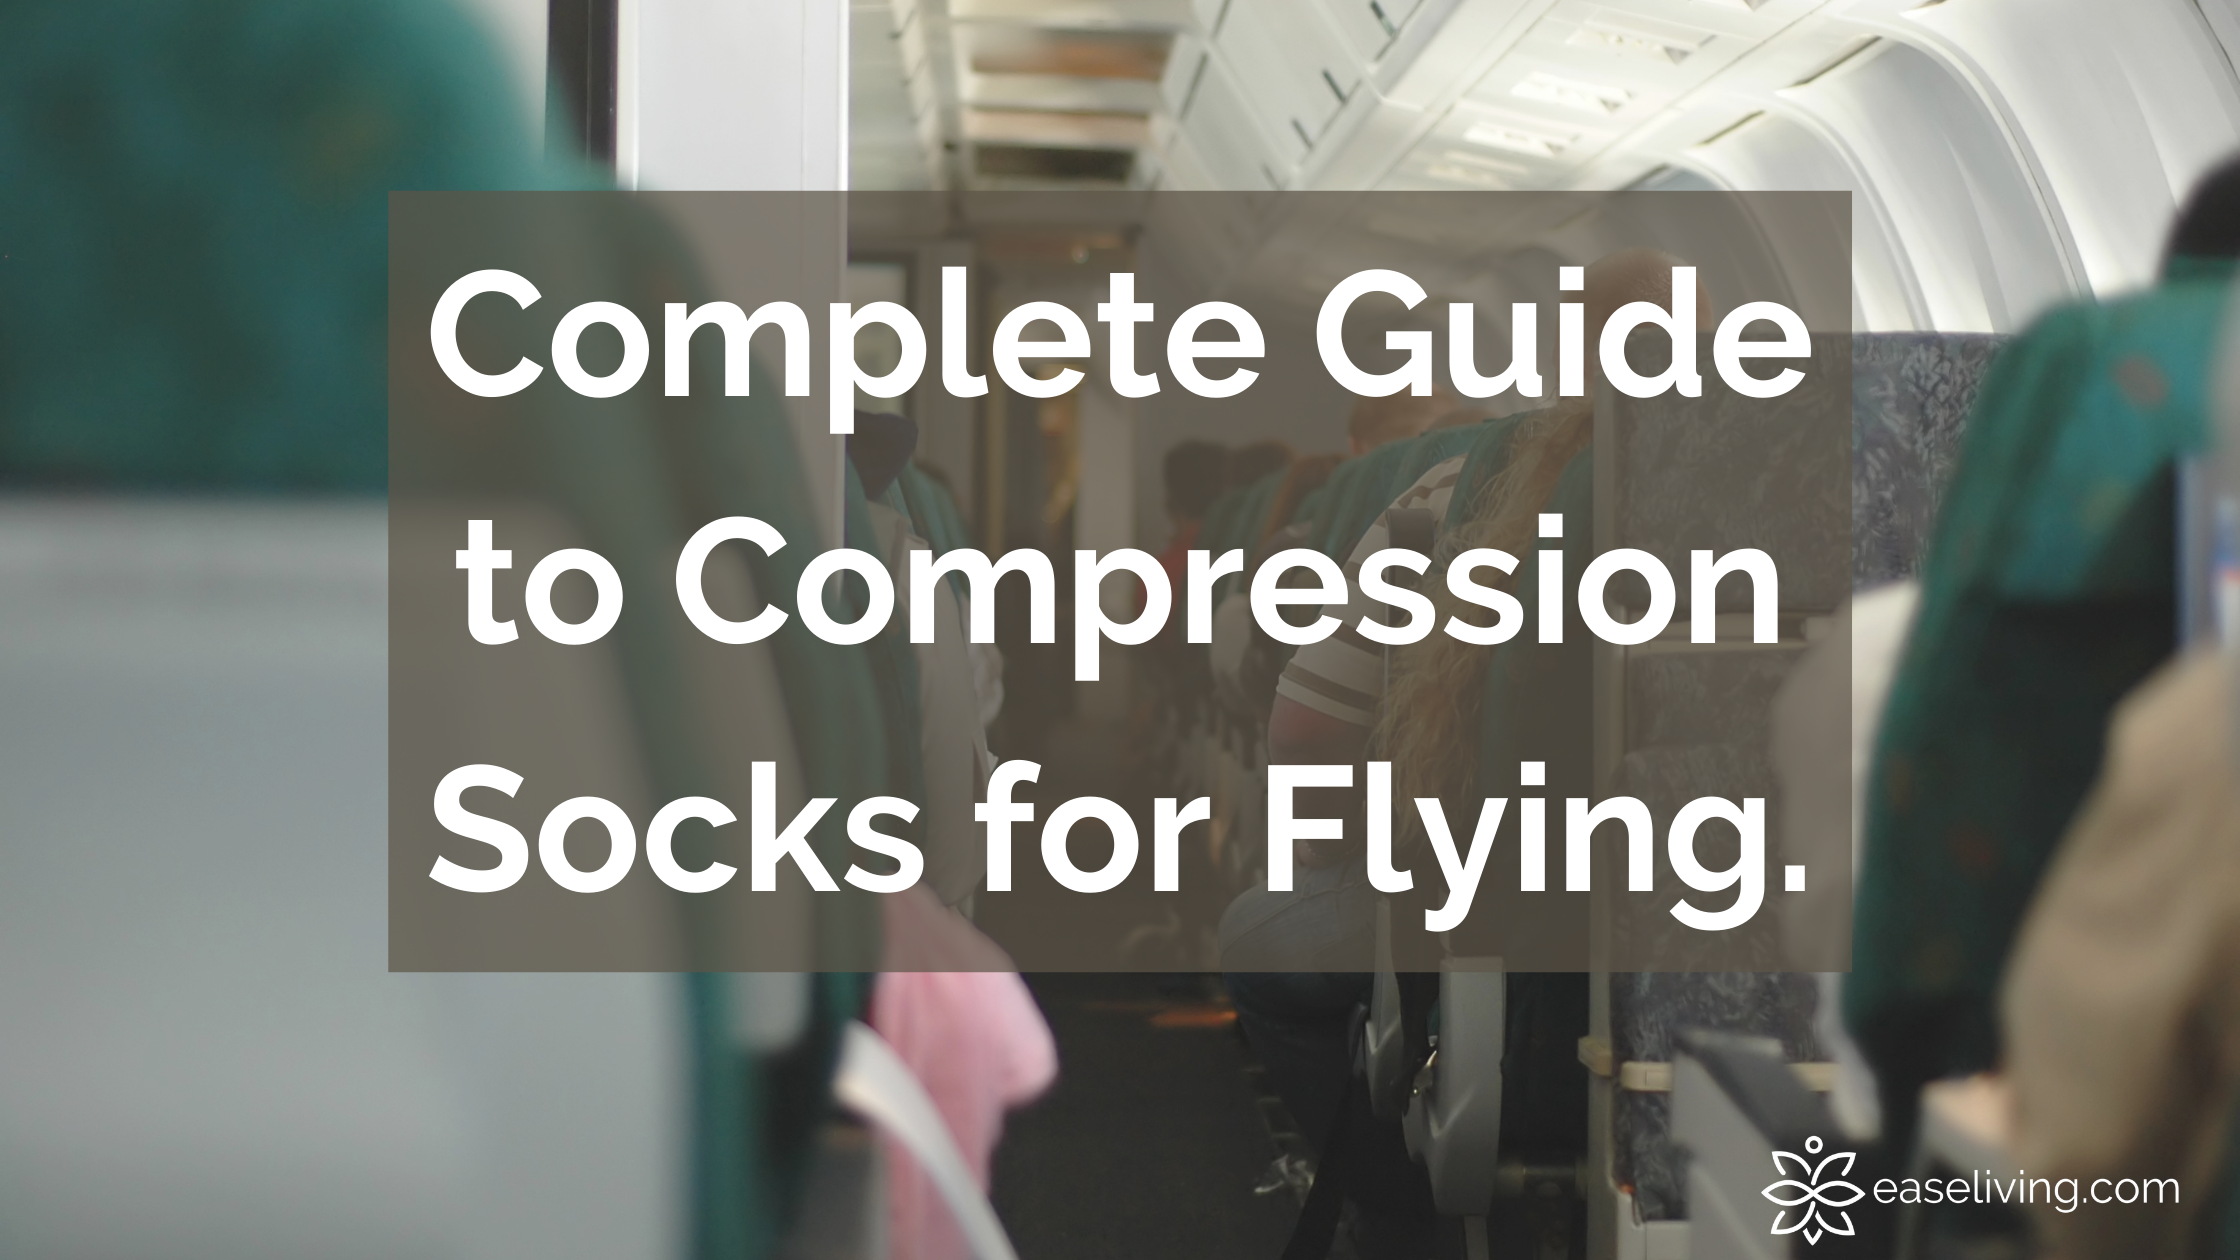 Find Relief During Long Flights with Our Zoomlite Compression Socks